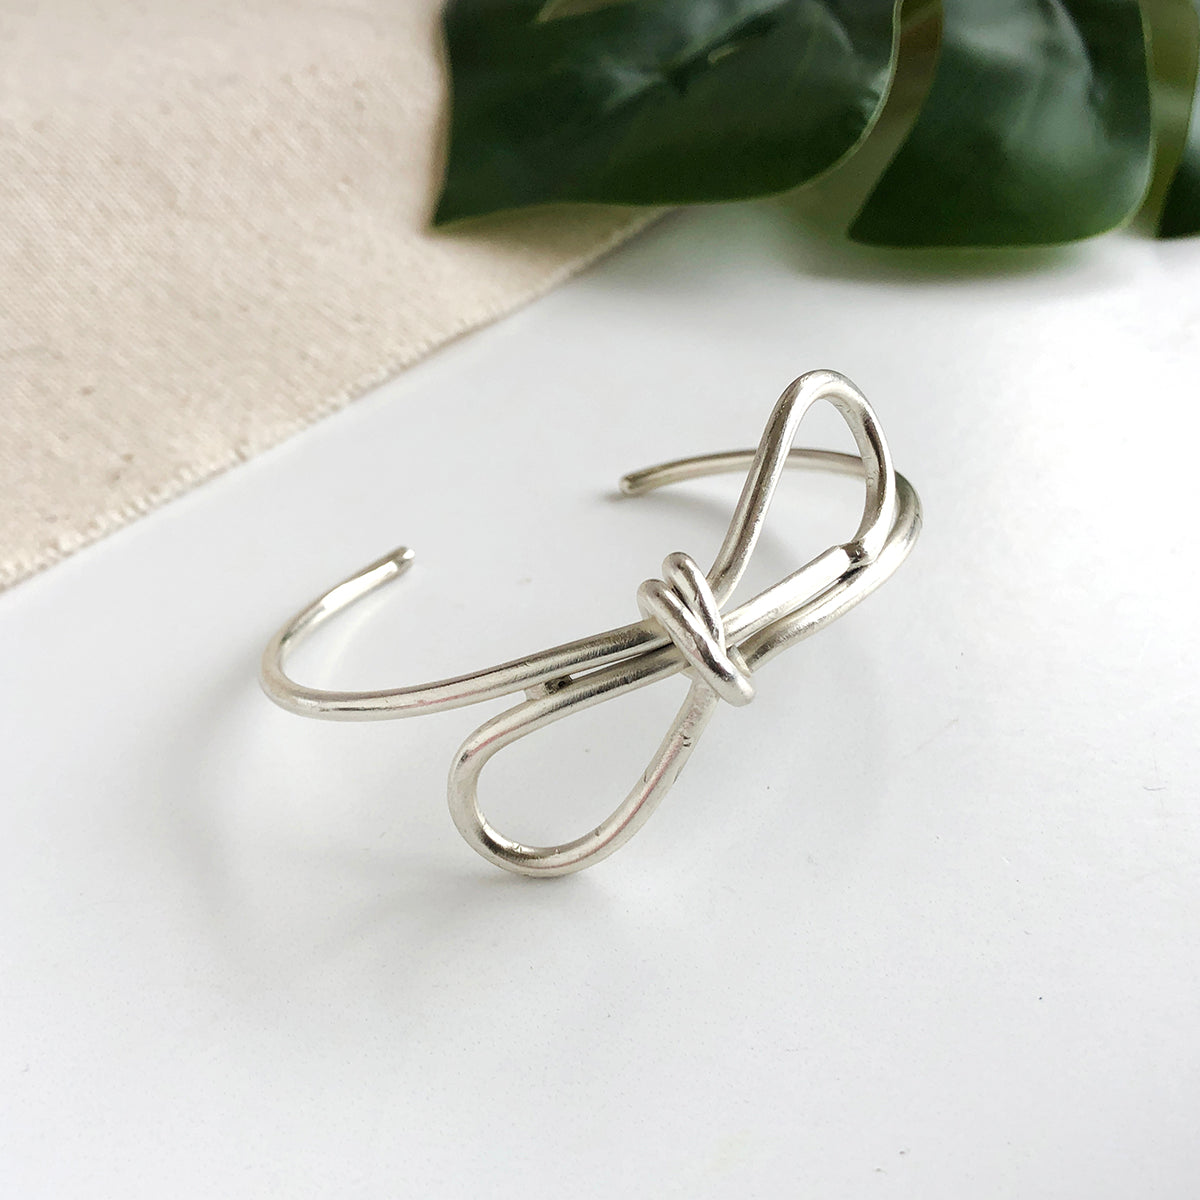 Sculptural Bow Cuff - Sliver and Gold